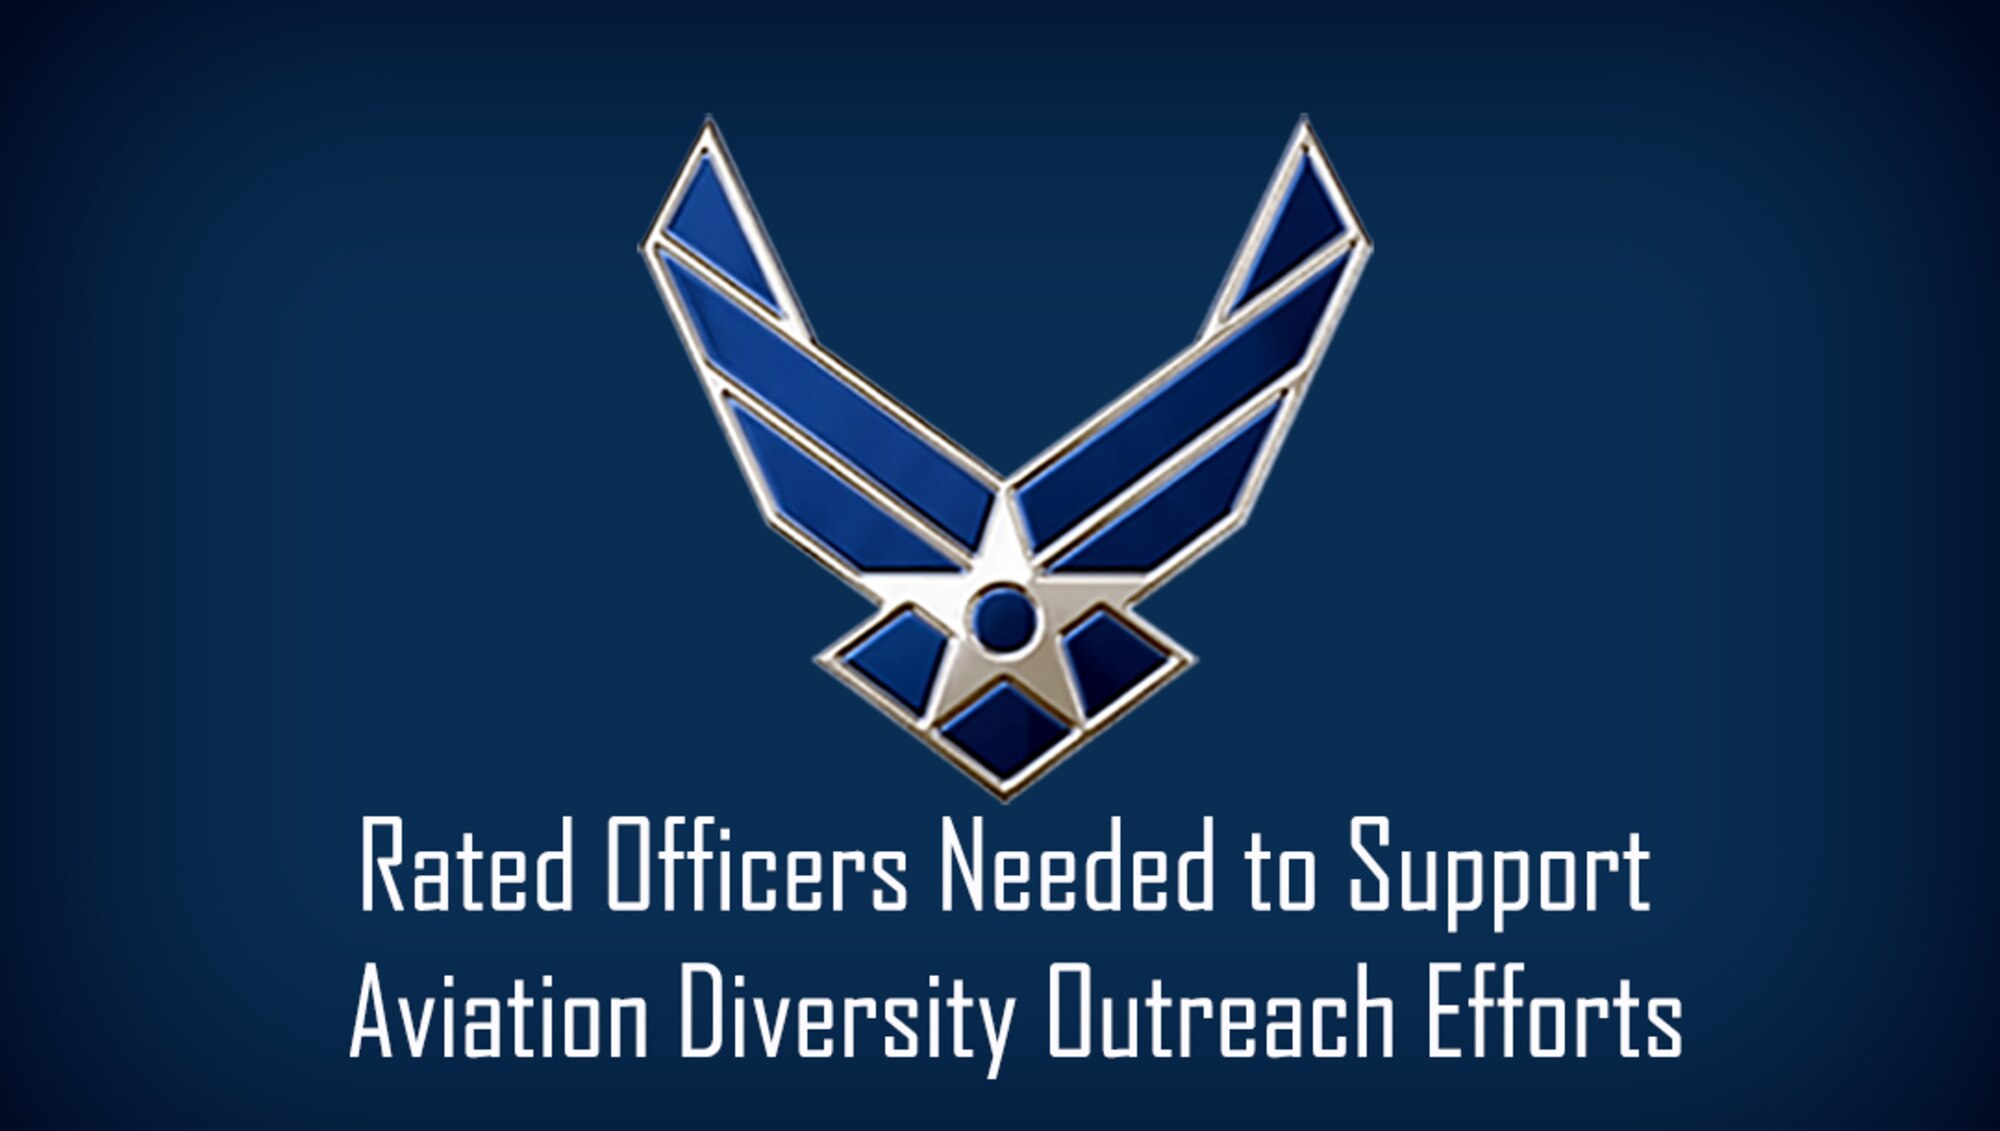 Air Force Recruiting Service Detachment 1 is encouraging units to nominate Air Force rated officers from across the Total Force to support outreach and engagement activities designed to increase aviation diversity and support youth aviation awareness.  Deadline to apply is Nov. 30, 2019, but can be extended with coordination through AFRS Det 1.Interested parties should call or email AFRS Det 1 at DSN 665-3227 or commercial (210) 565-3227 or via email at AFRS.DET1.Ops@us.af.mil. (U.S. Air Force graphic / Dan Hawkins)